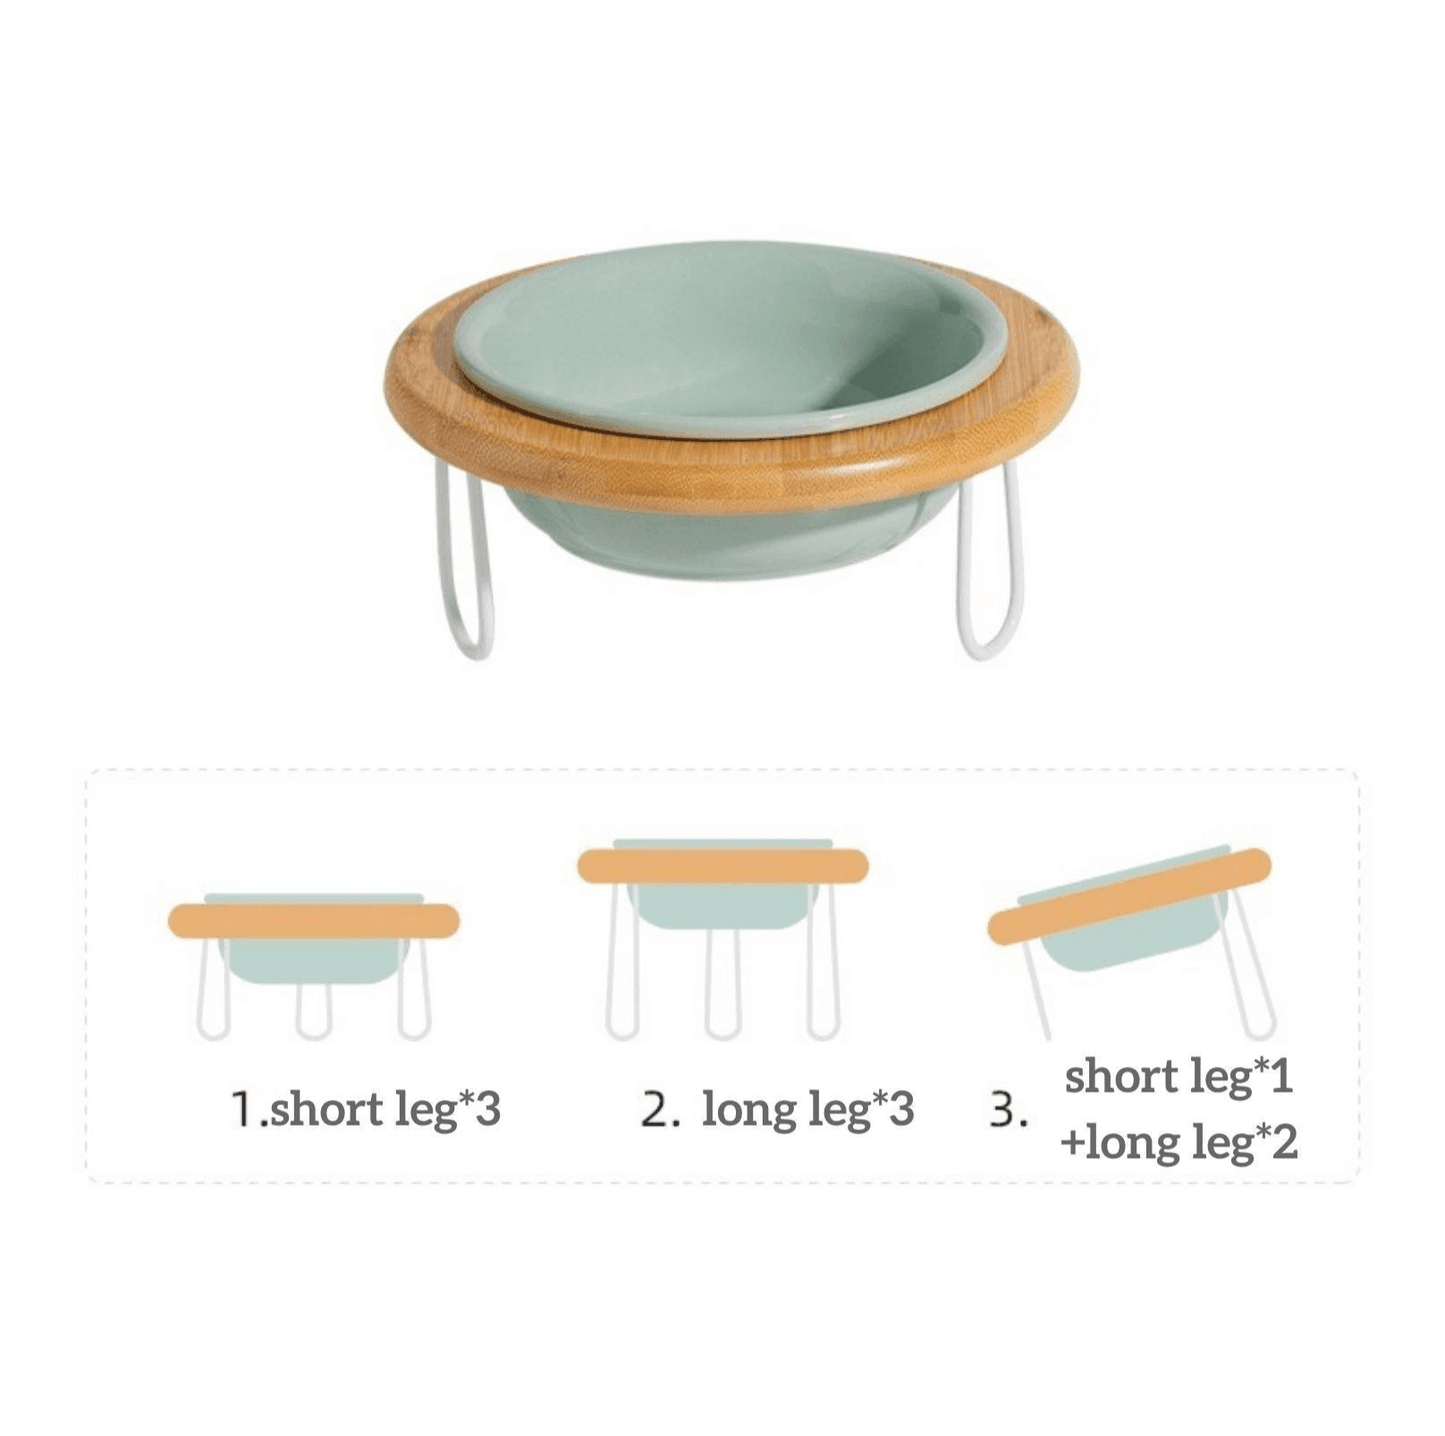 Elevated Ceramic Bowl w/ Adjustable Stand